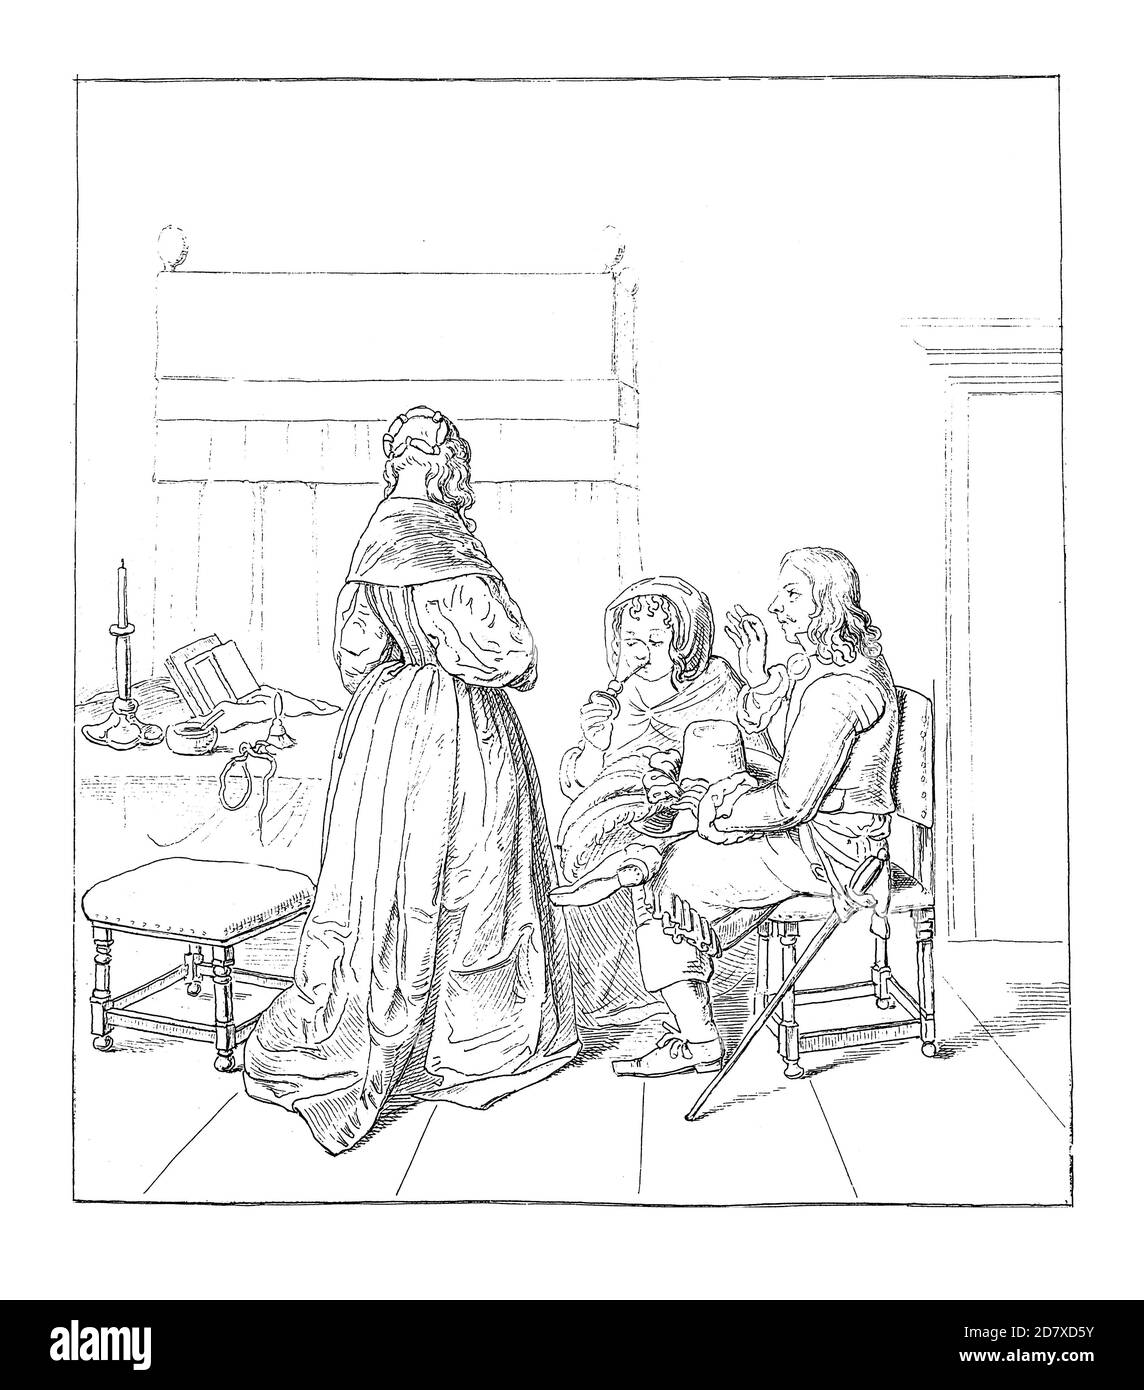 Antique engraving depicting The Paternal Admonition, painting by Gerard ter Borch. He was born in December 1617 in Zwolle, Netherlands and died on Dec Stock Photo